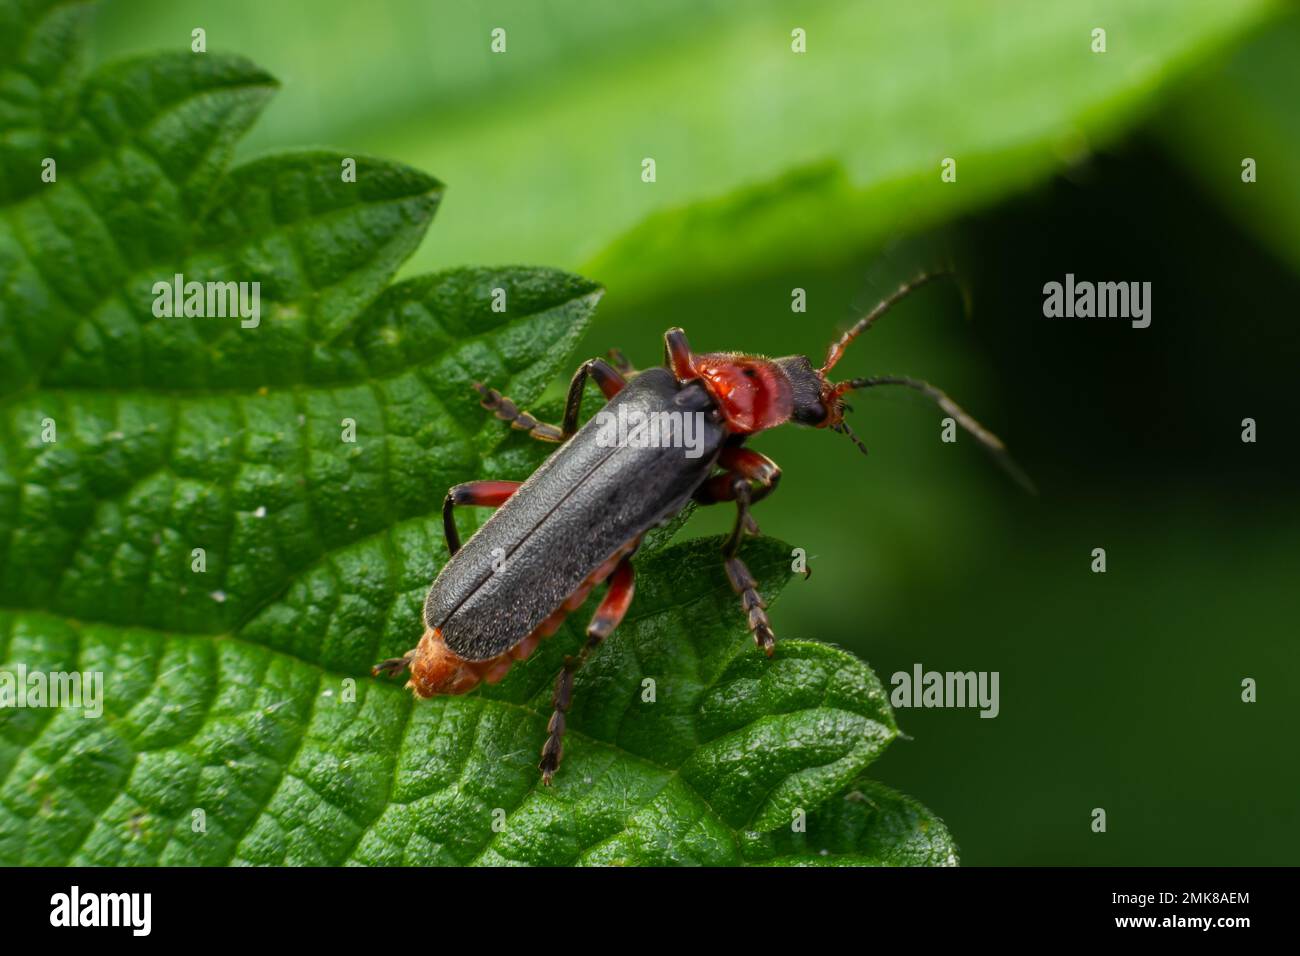 Beetle cantharis fusca sits on a leaf of grass in early summer. Stock Photo